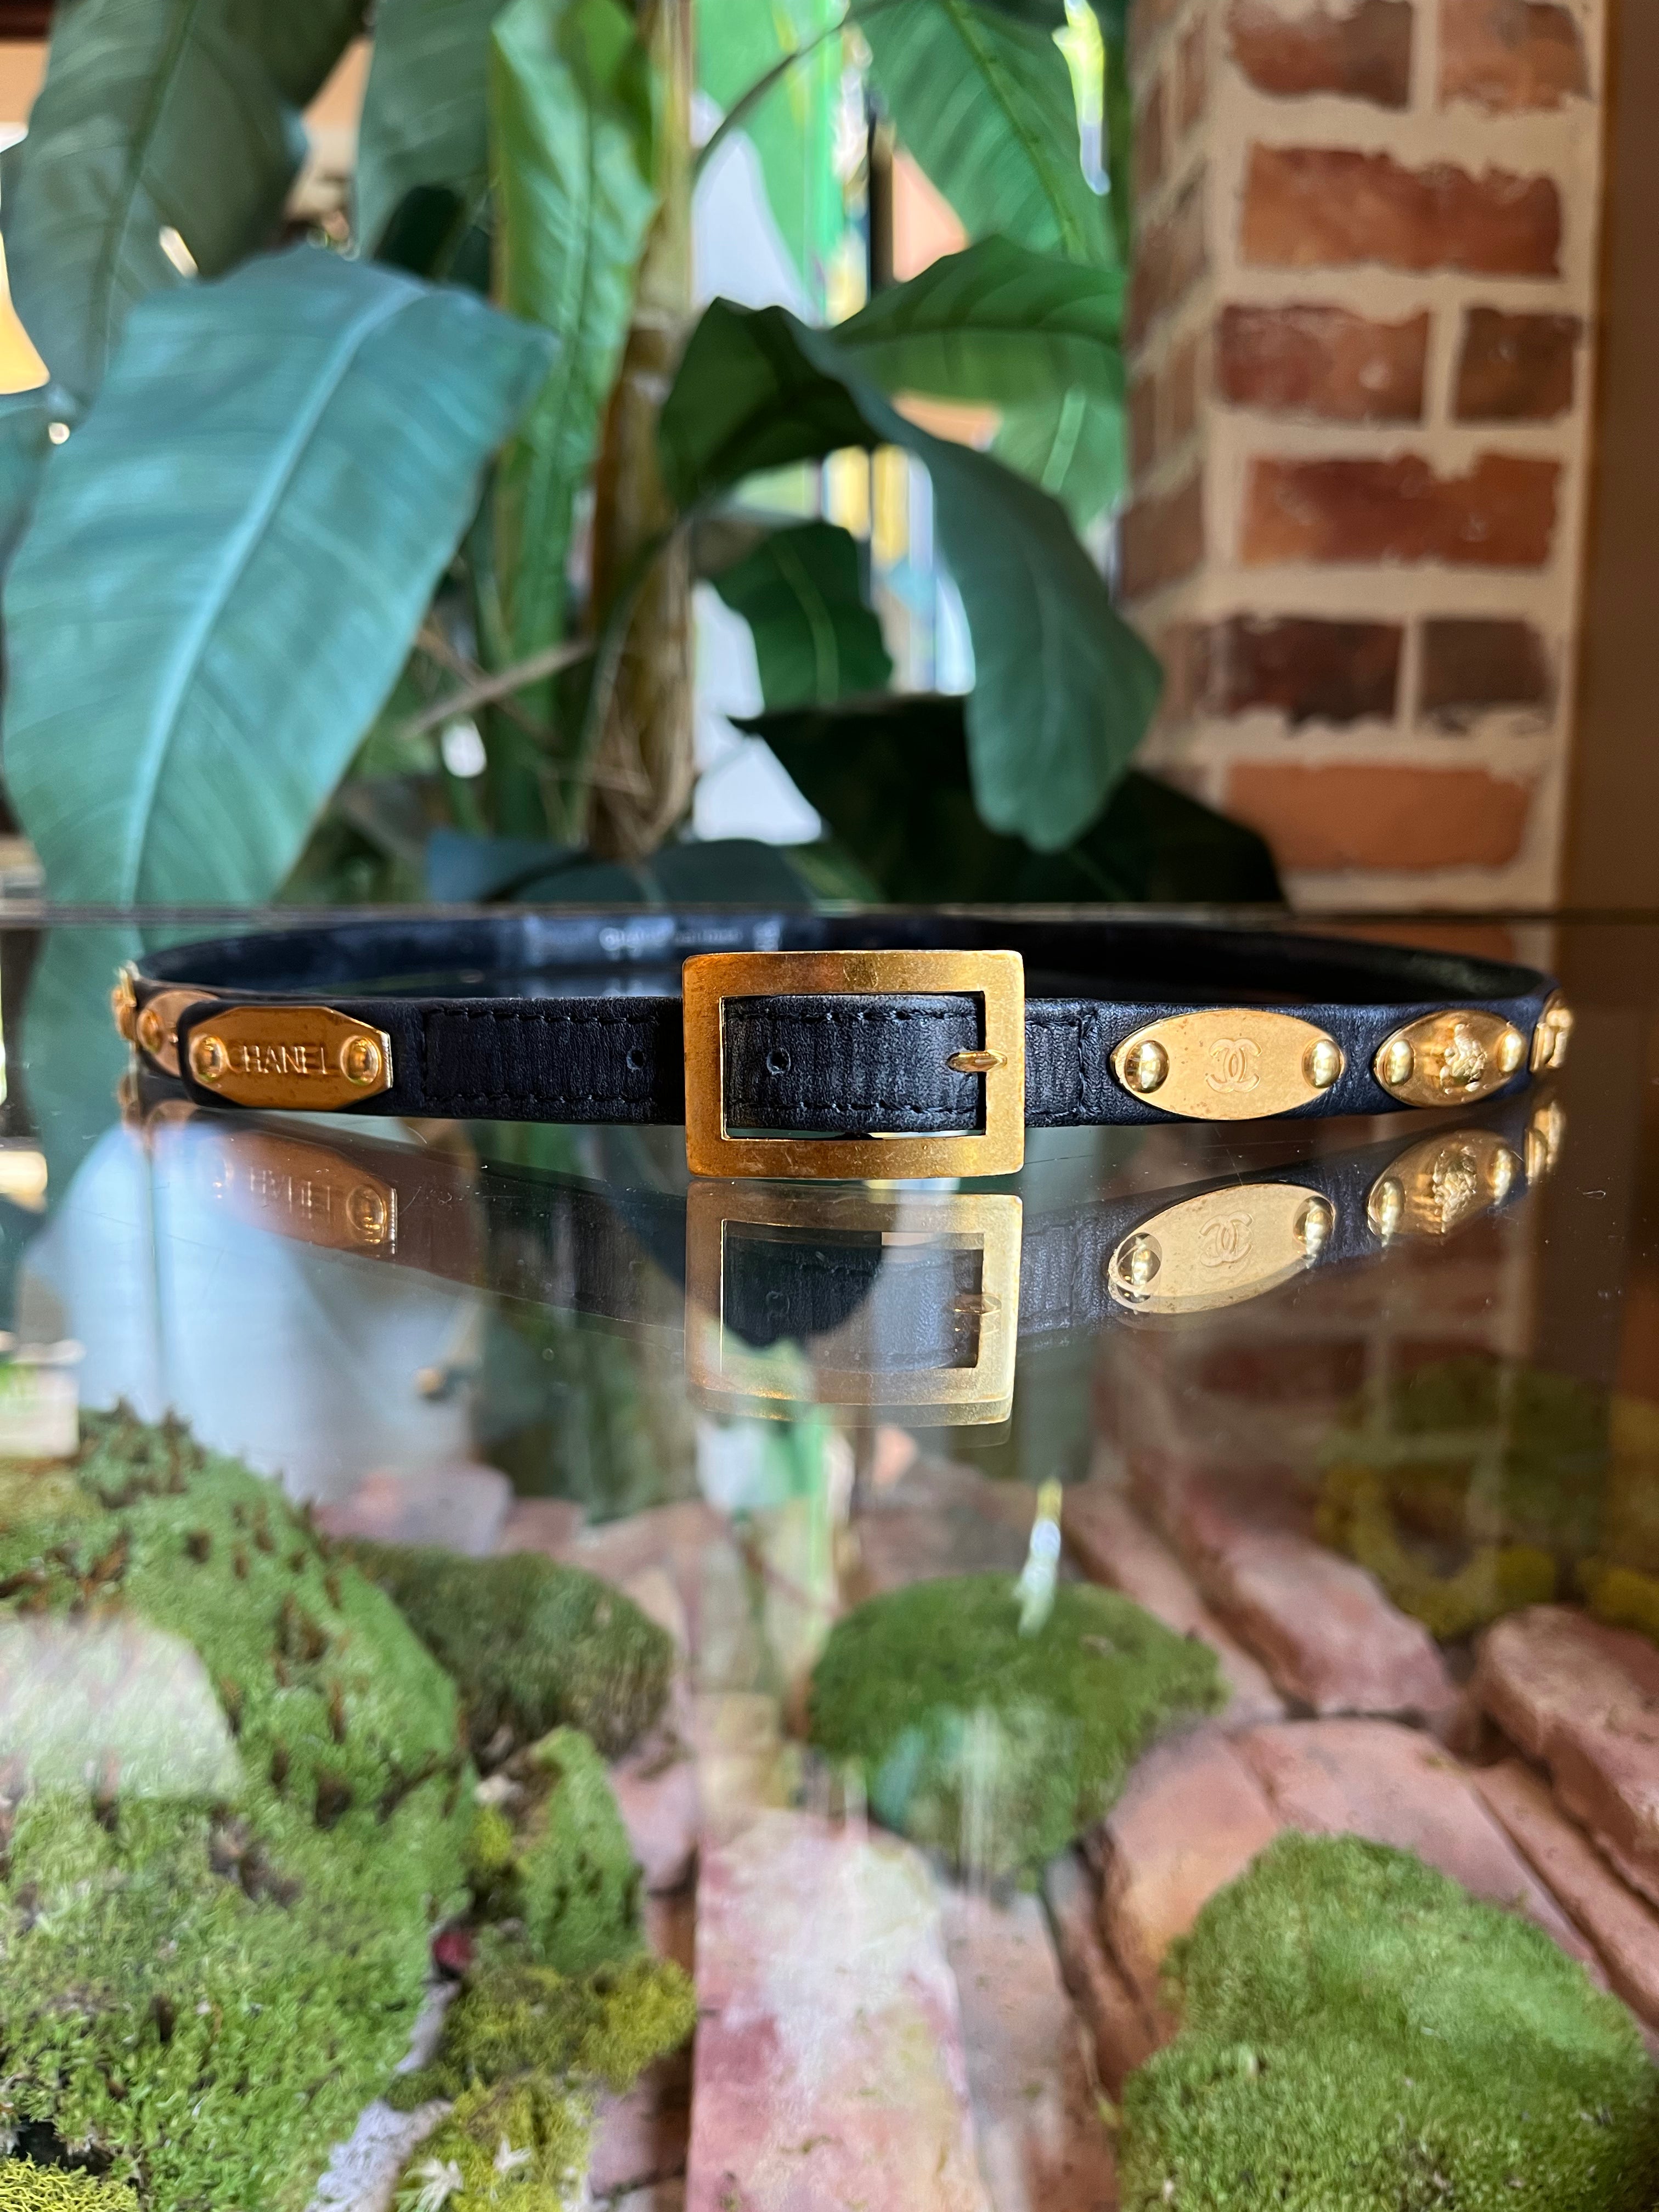 CHANEL-CoCo-Mark-Buckle-Leather-Belt-Black-85/34-08C